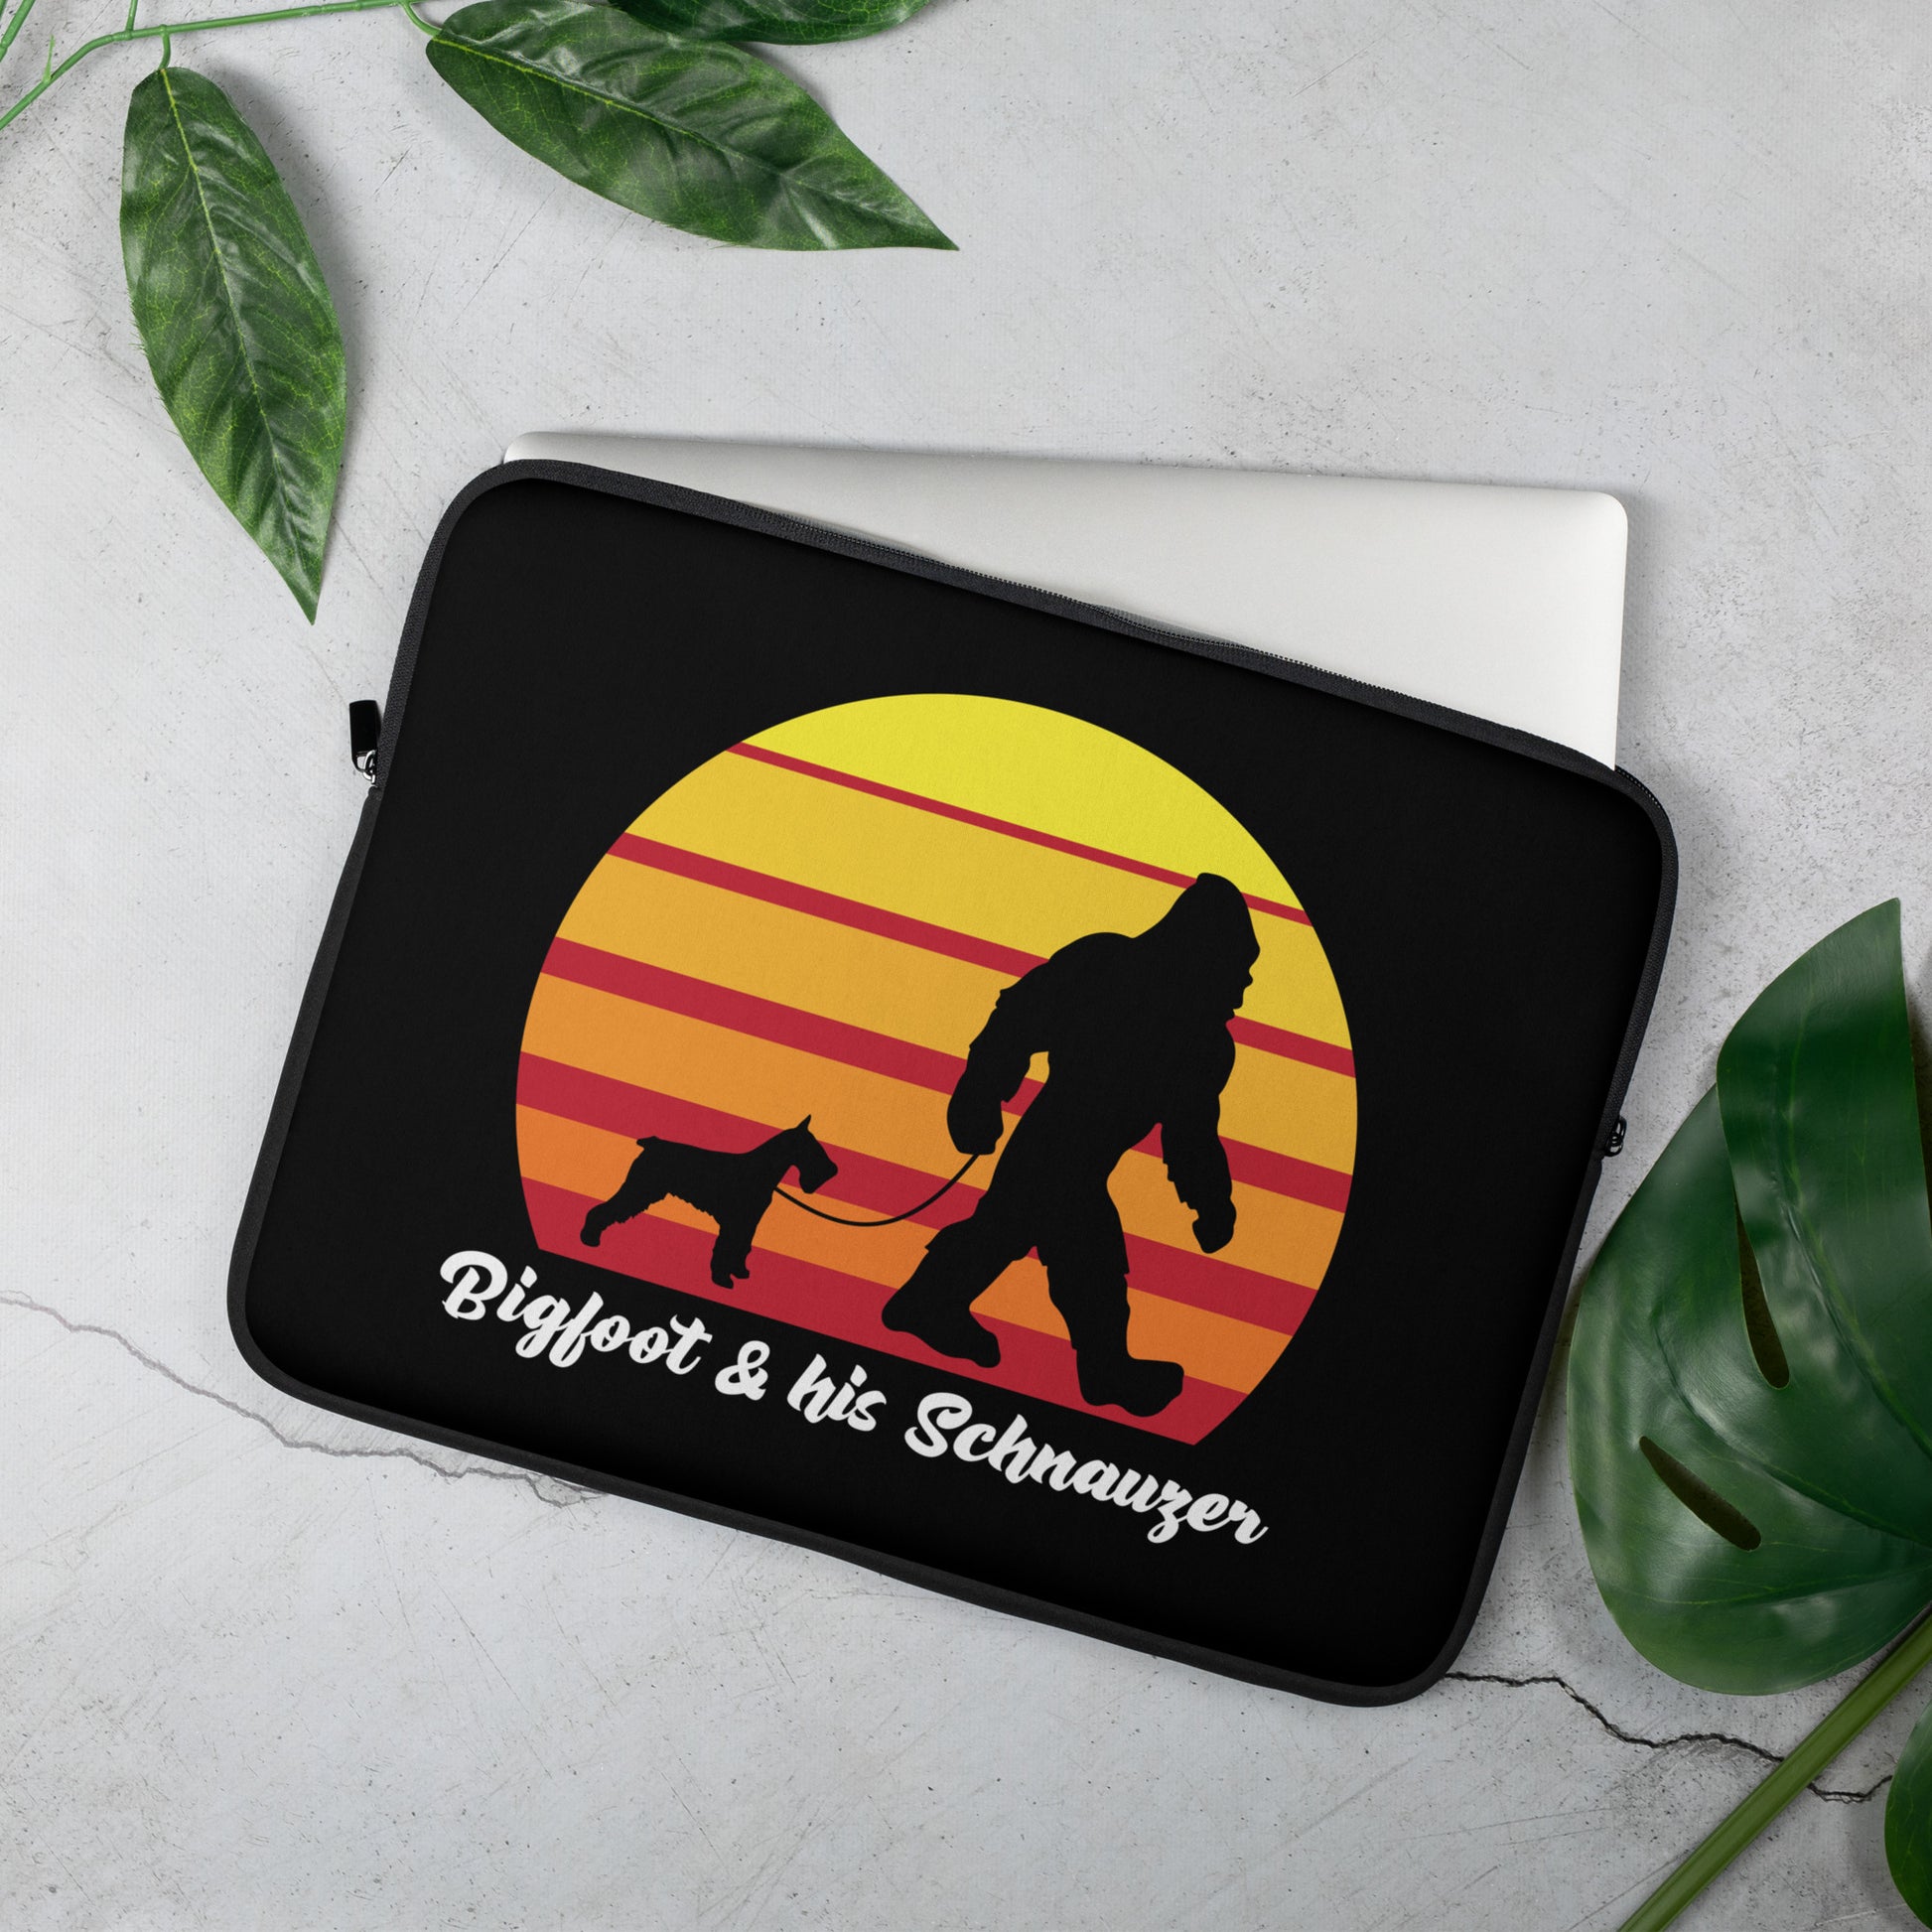 Bigfoot and his Schnauzer Laptop Sleeve by Dog Artistry.